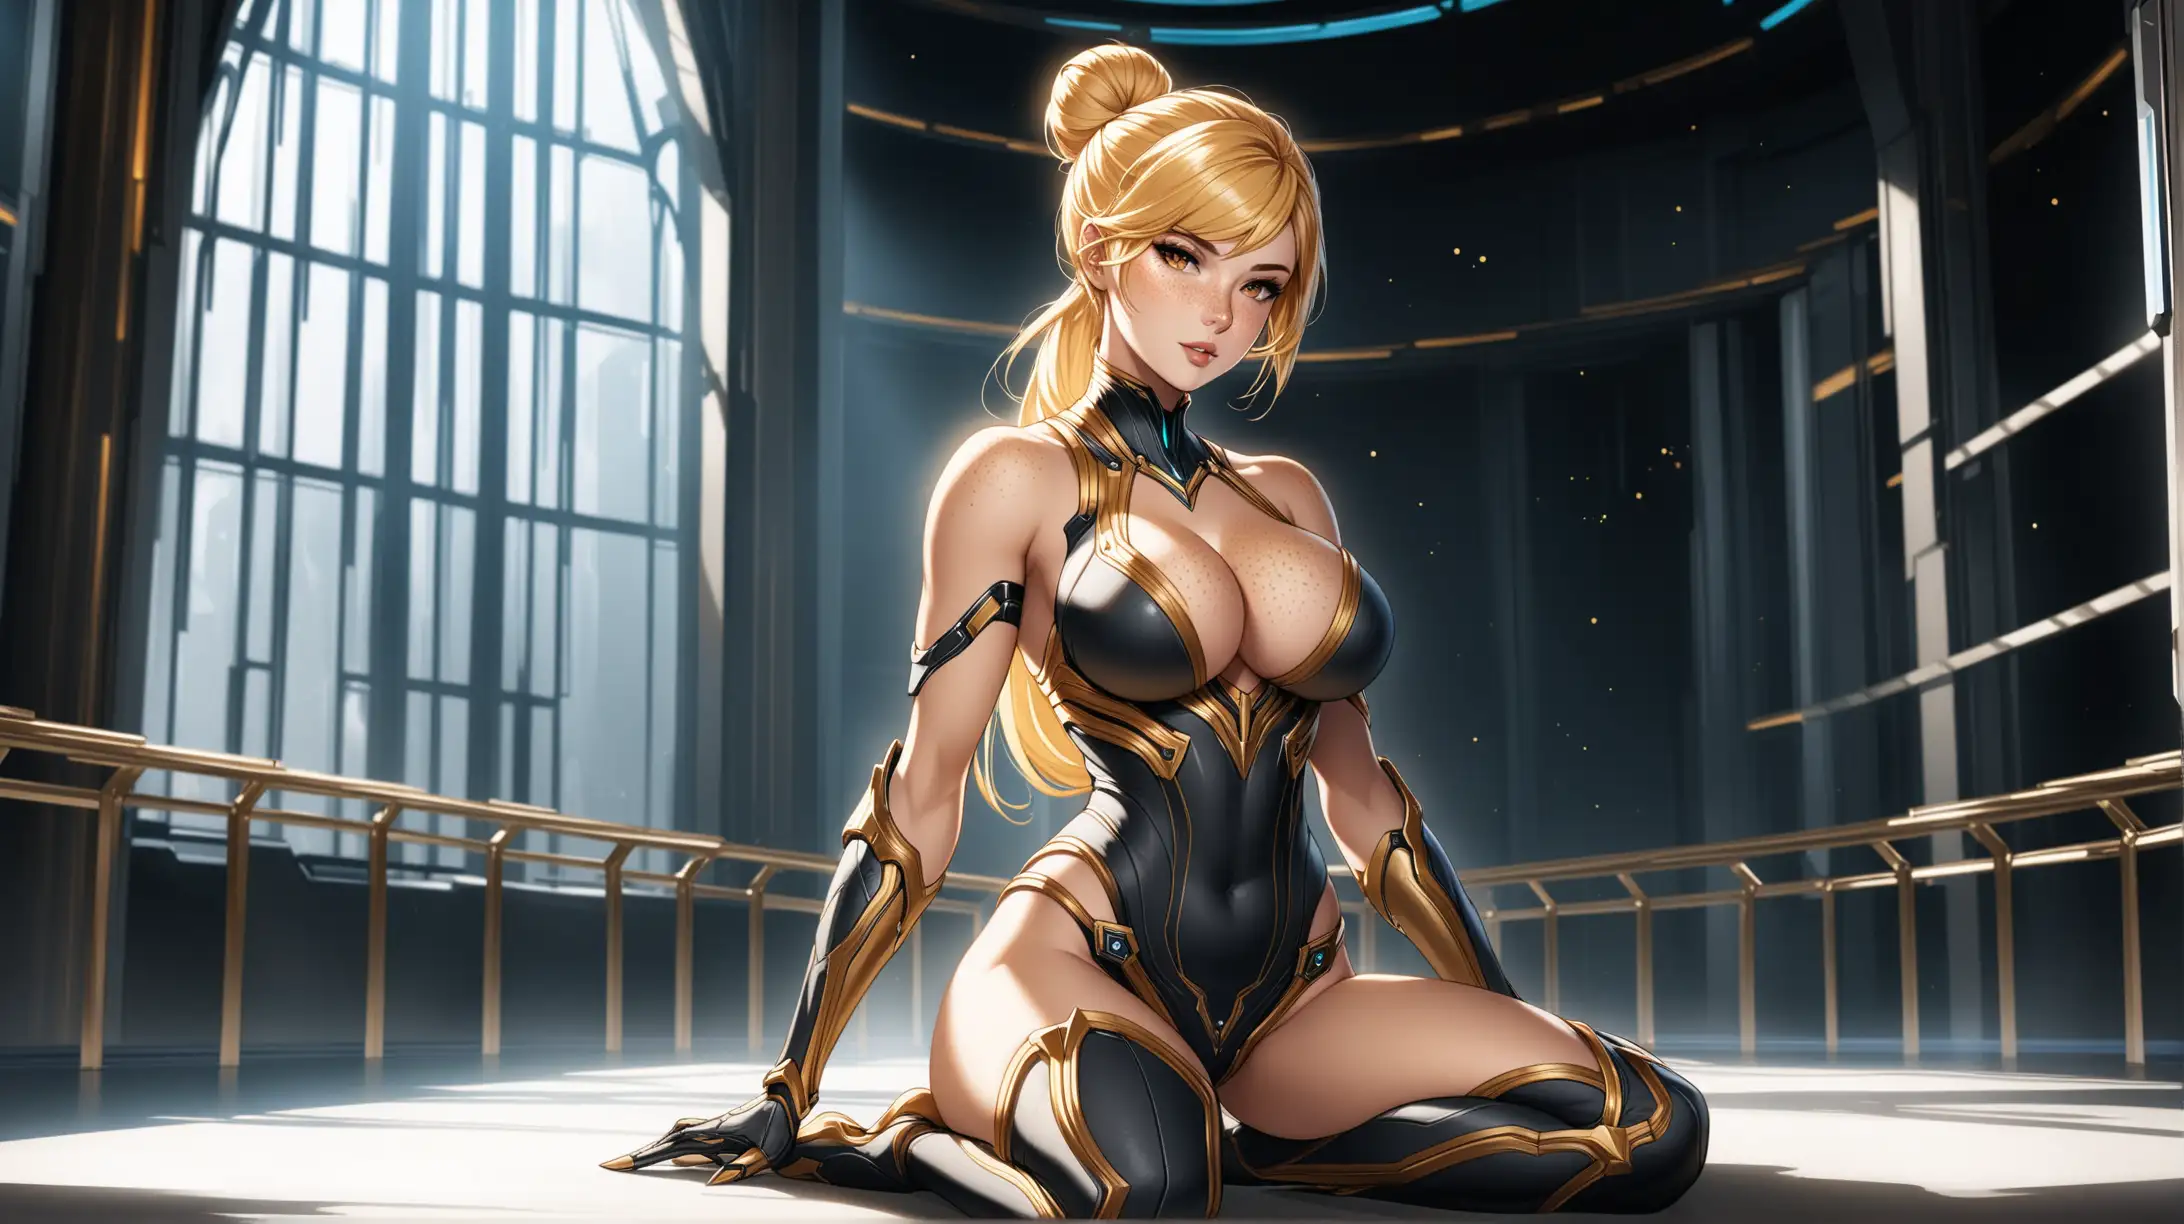 Draw a woman, long blonde hair in a bun, gold eyes, freckles, perky figure, outfit inspired from the game Warframe, high quality, low angle, indoors, seductive pose, cleavage, natural lighting, looking at the viewer